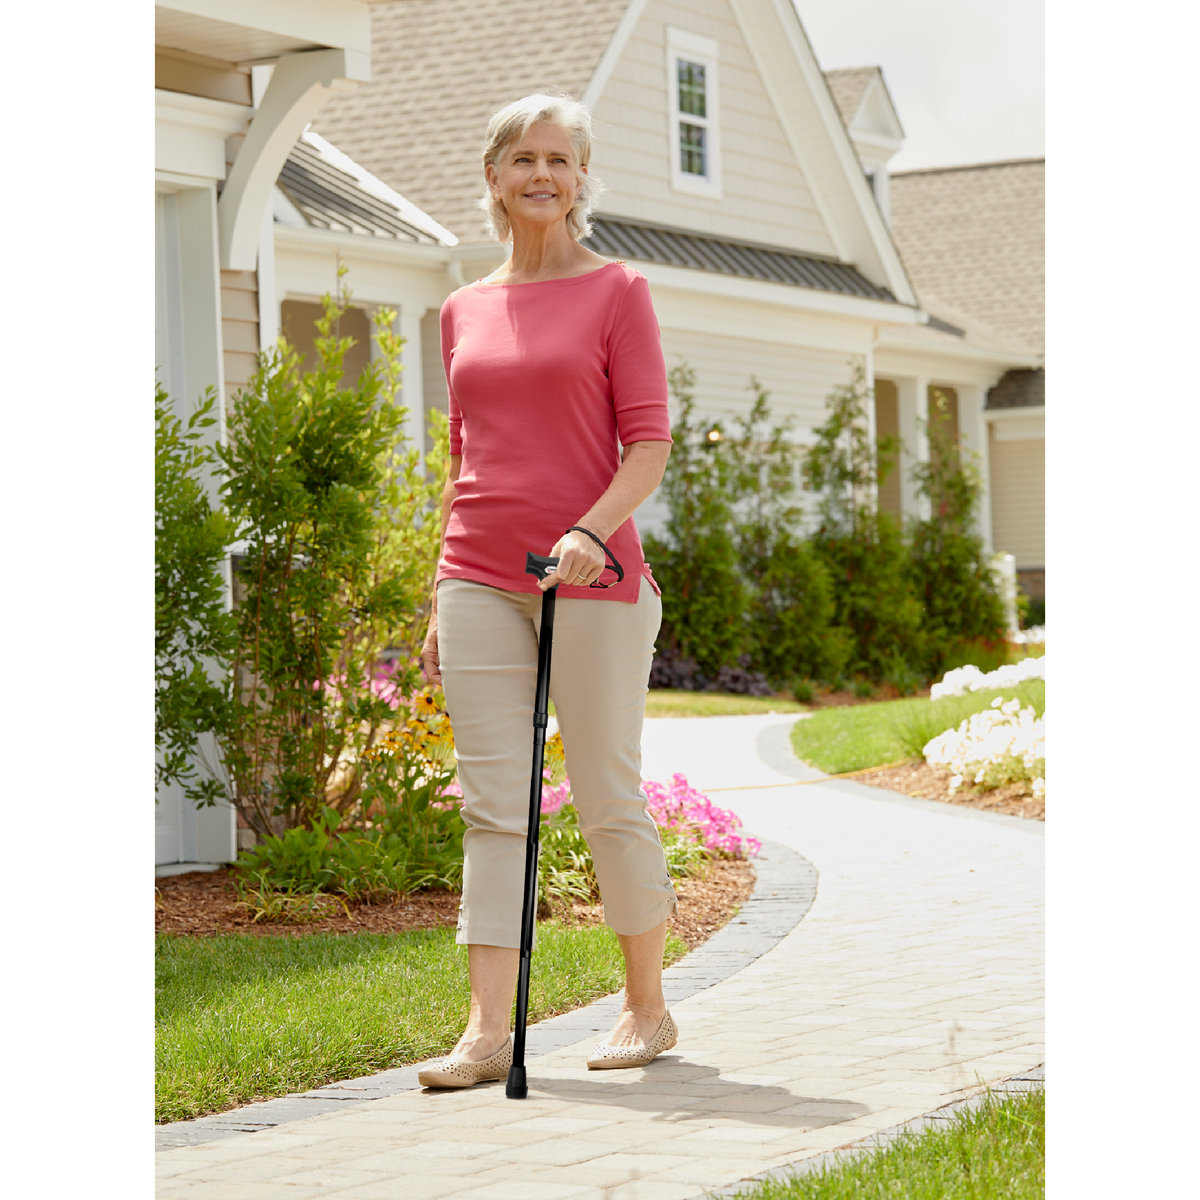 A woman walking outside in a neighbourhood with the Carex walking cane